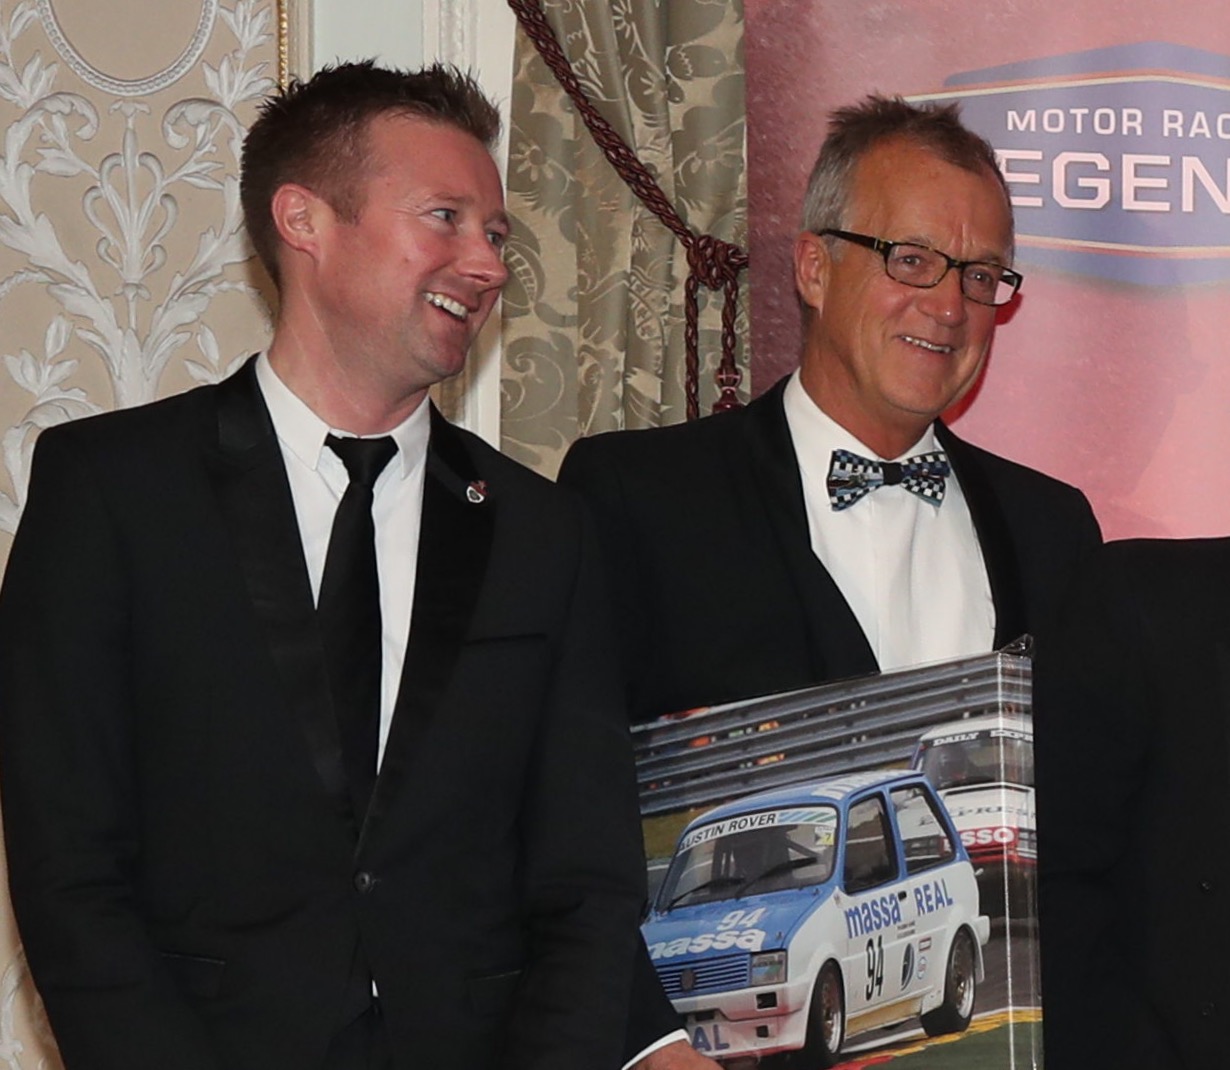 Motor Racing Legends lead the way with engine certification programme